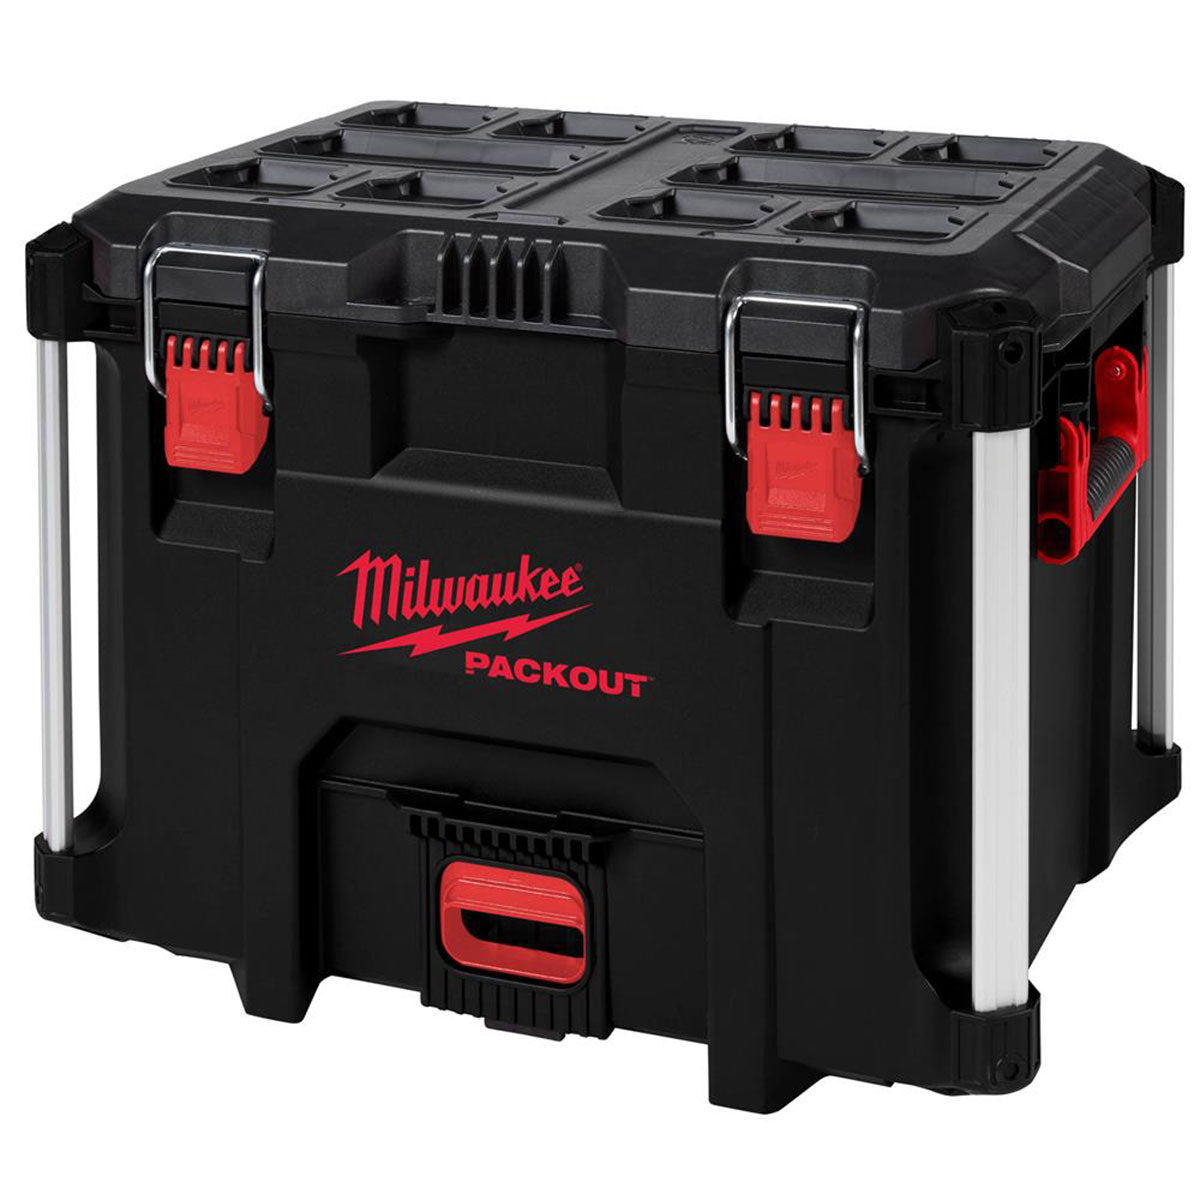 Milwaukee Packout Flat Trolley with 3 Piece Tool Box Set